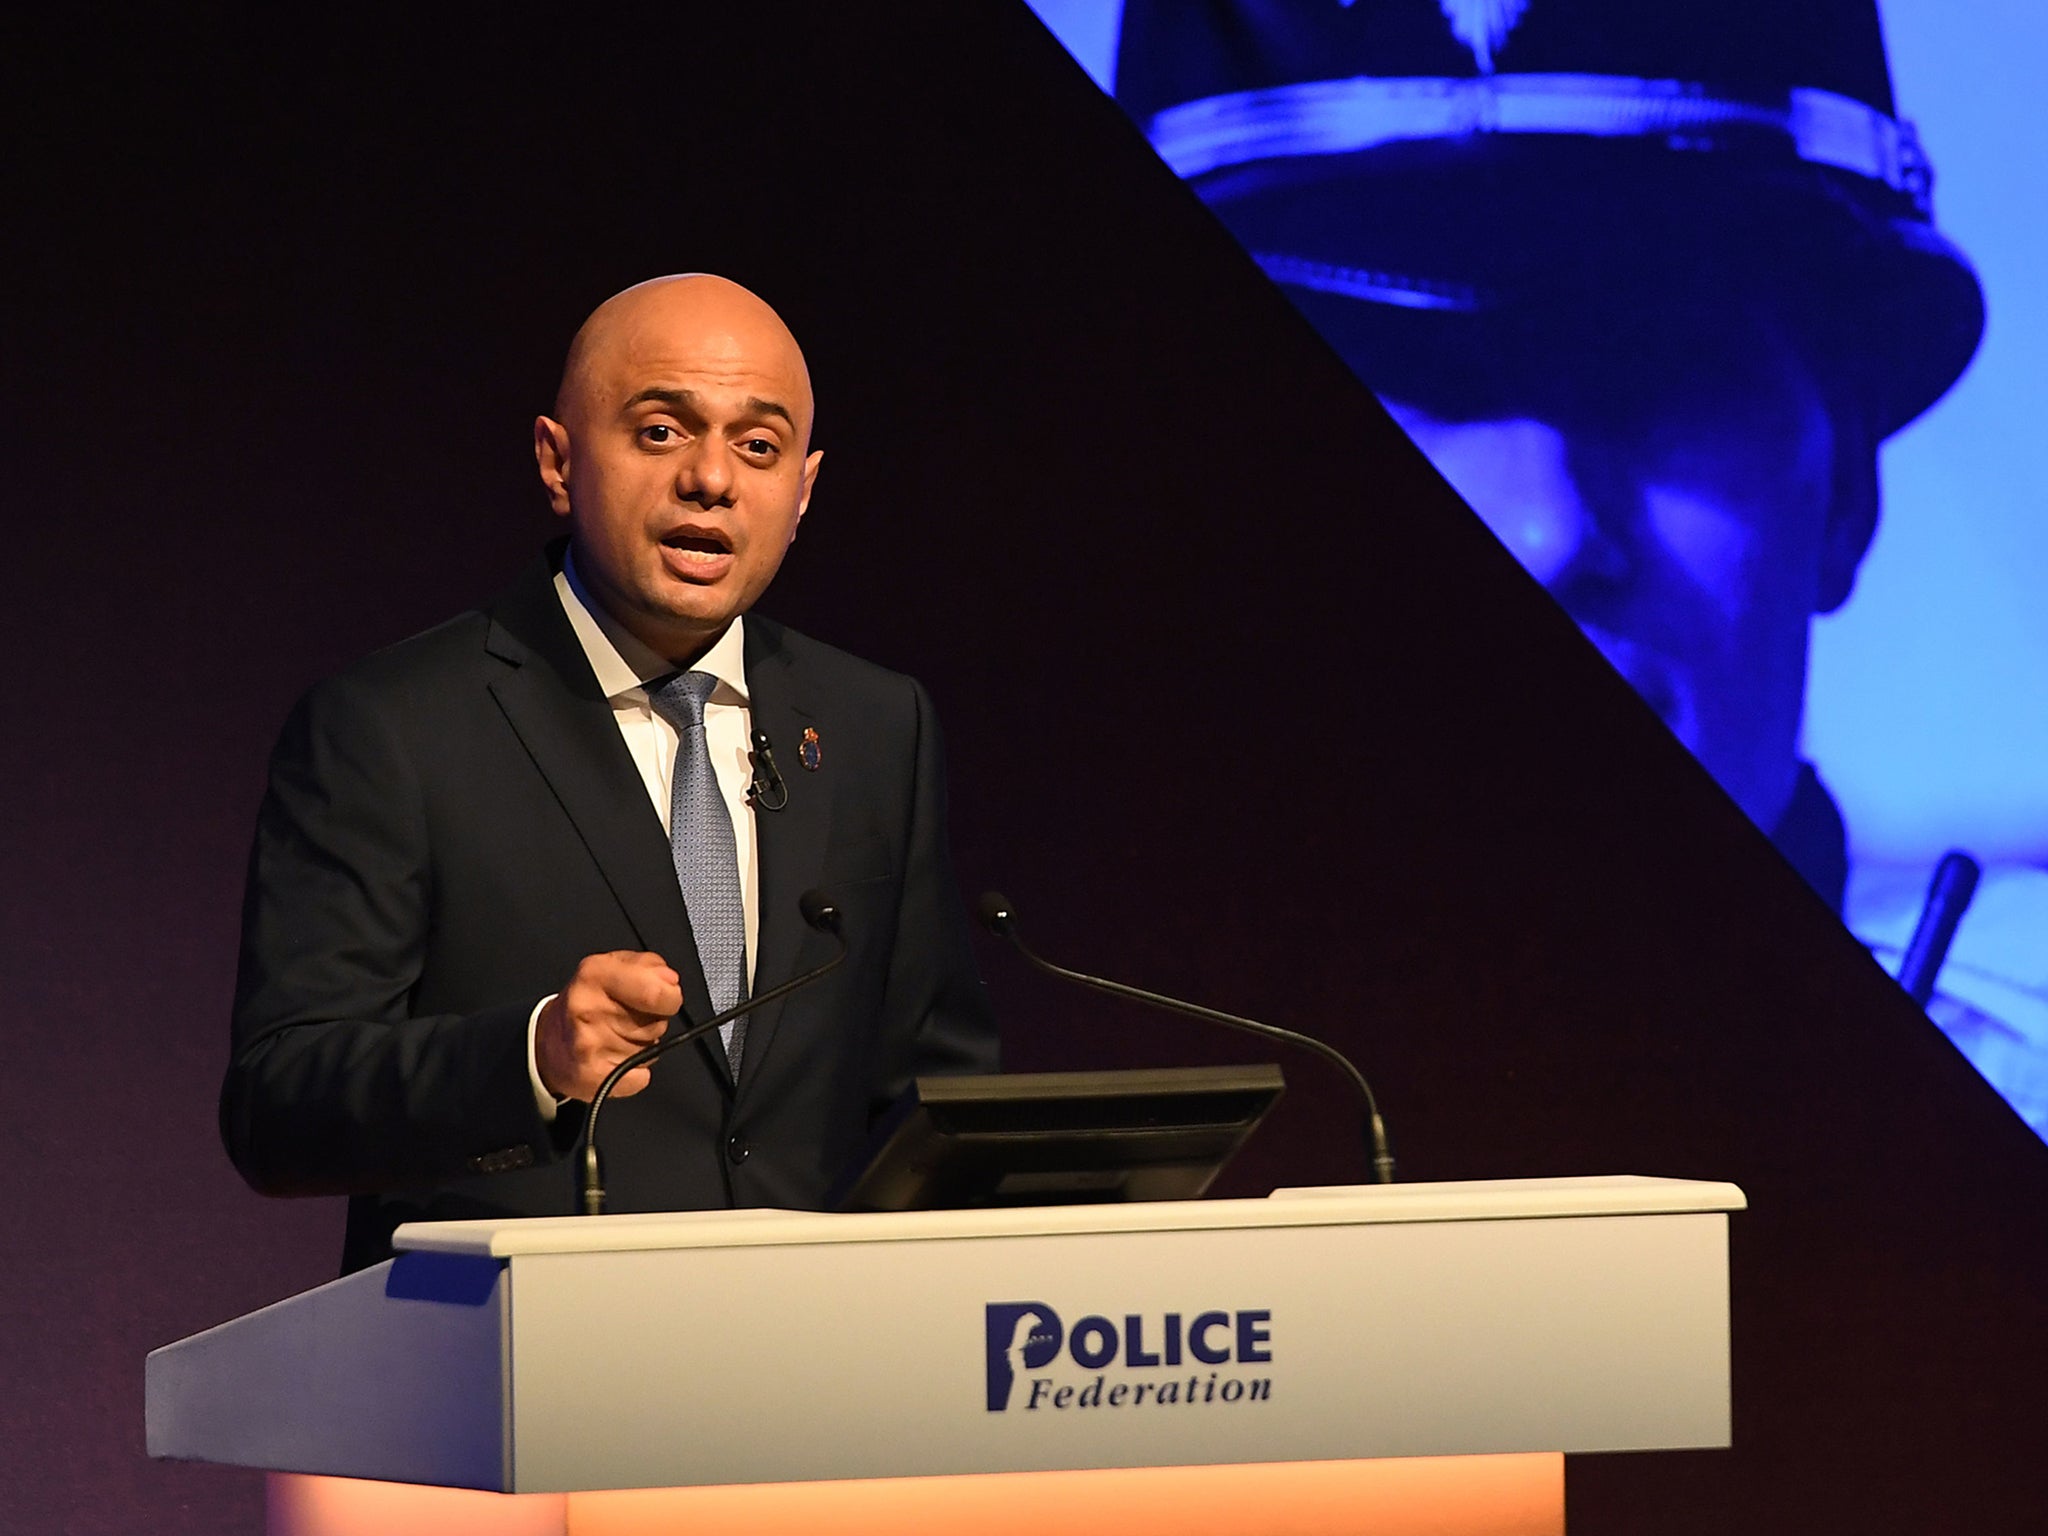 Sajid Javid is right to say the country needs a strong police force, but he should be wary of creating more problems for himself by abusing civil liberties in the process